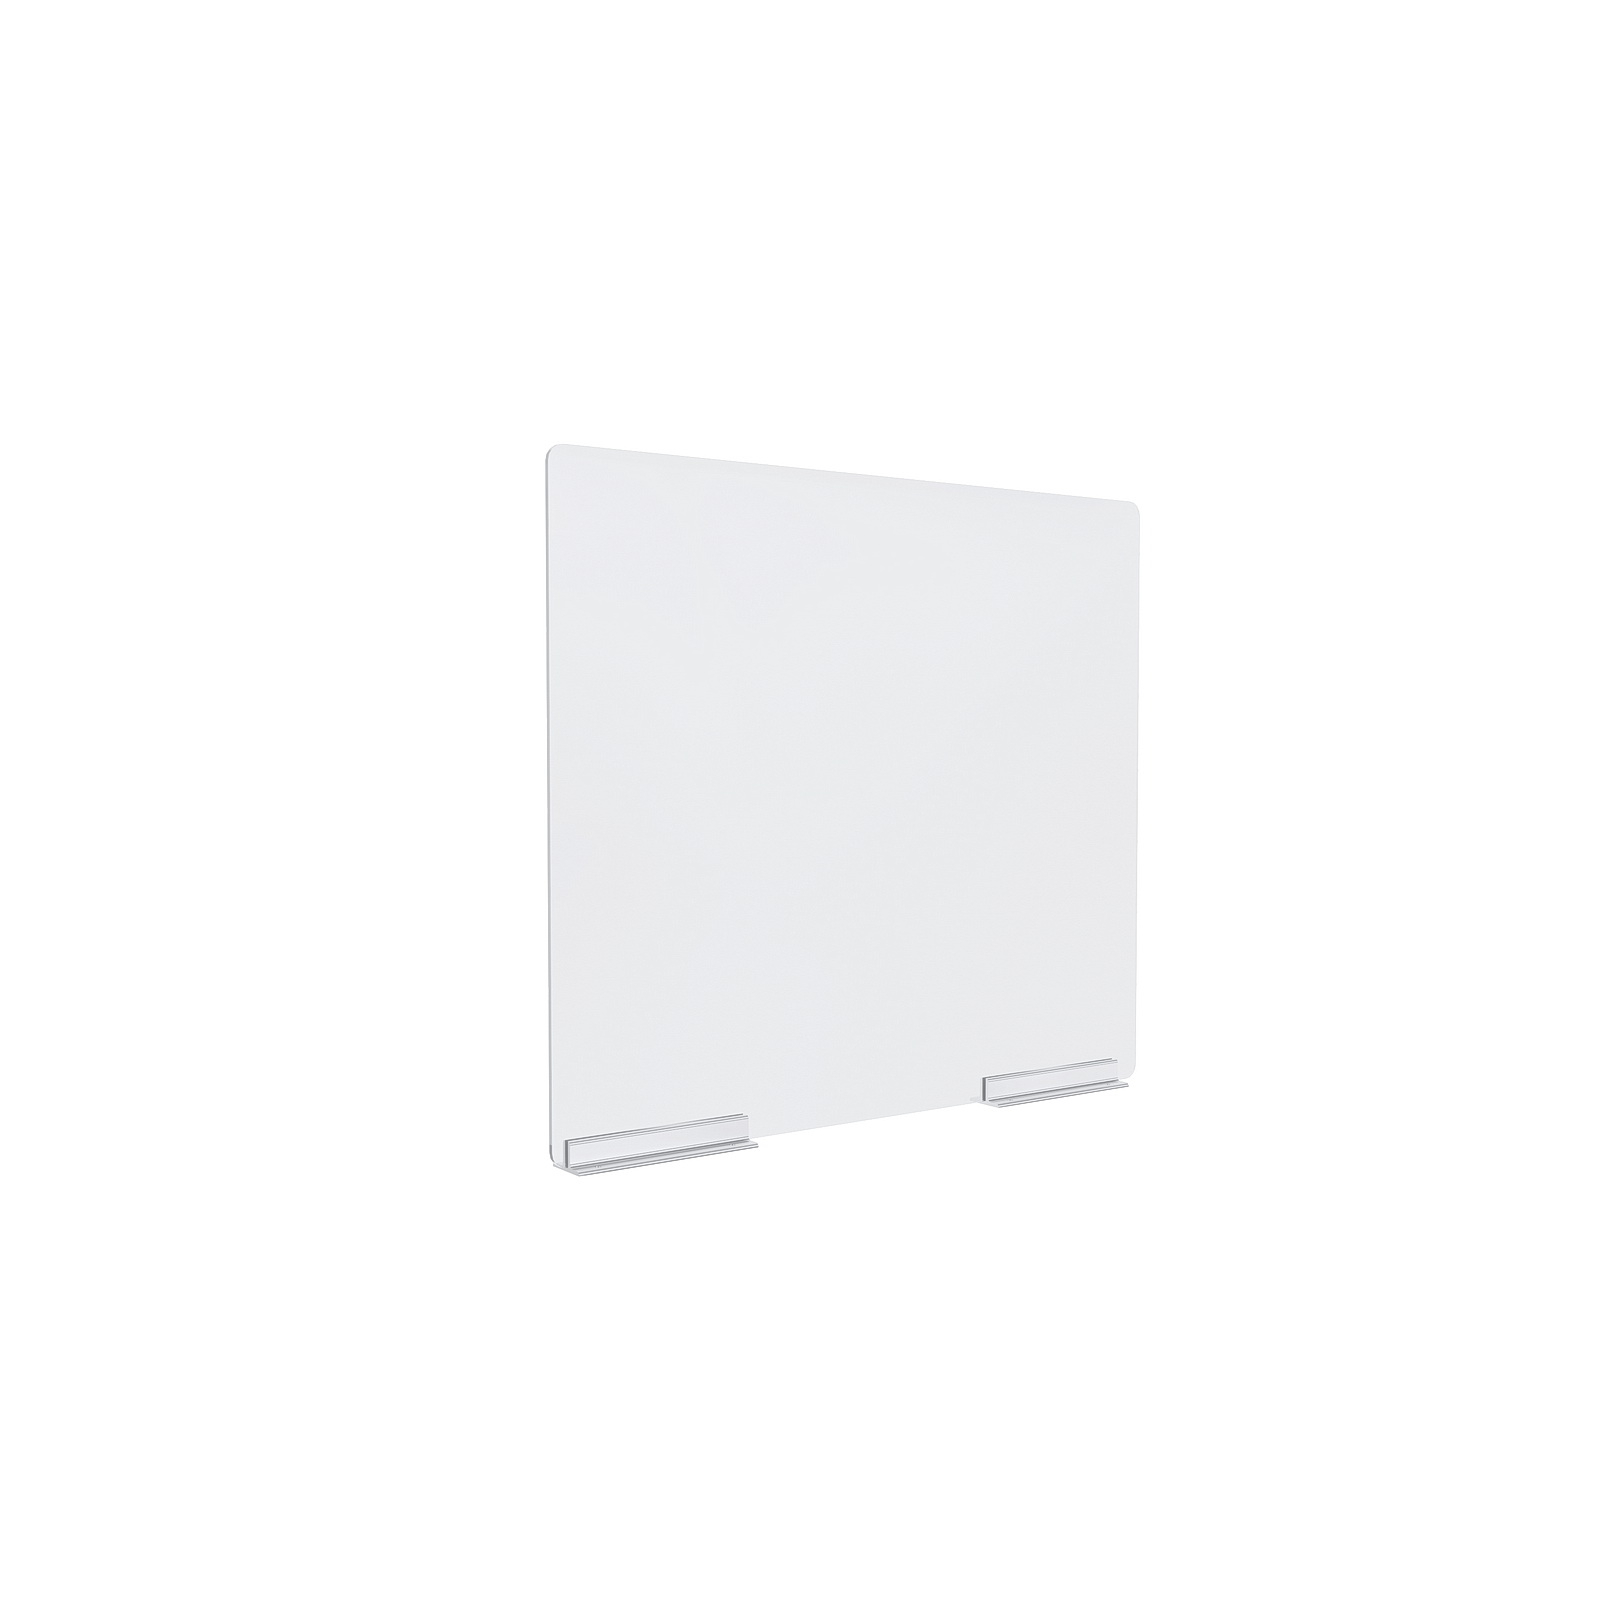 Clear Acrylic Sneeze Guard 20-1/2'' Wide x 23-1/2'' Tall, with (2) 6'' Clear Anodized Aluminum Channel Mounts